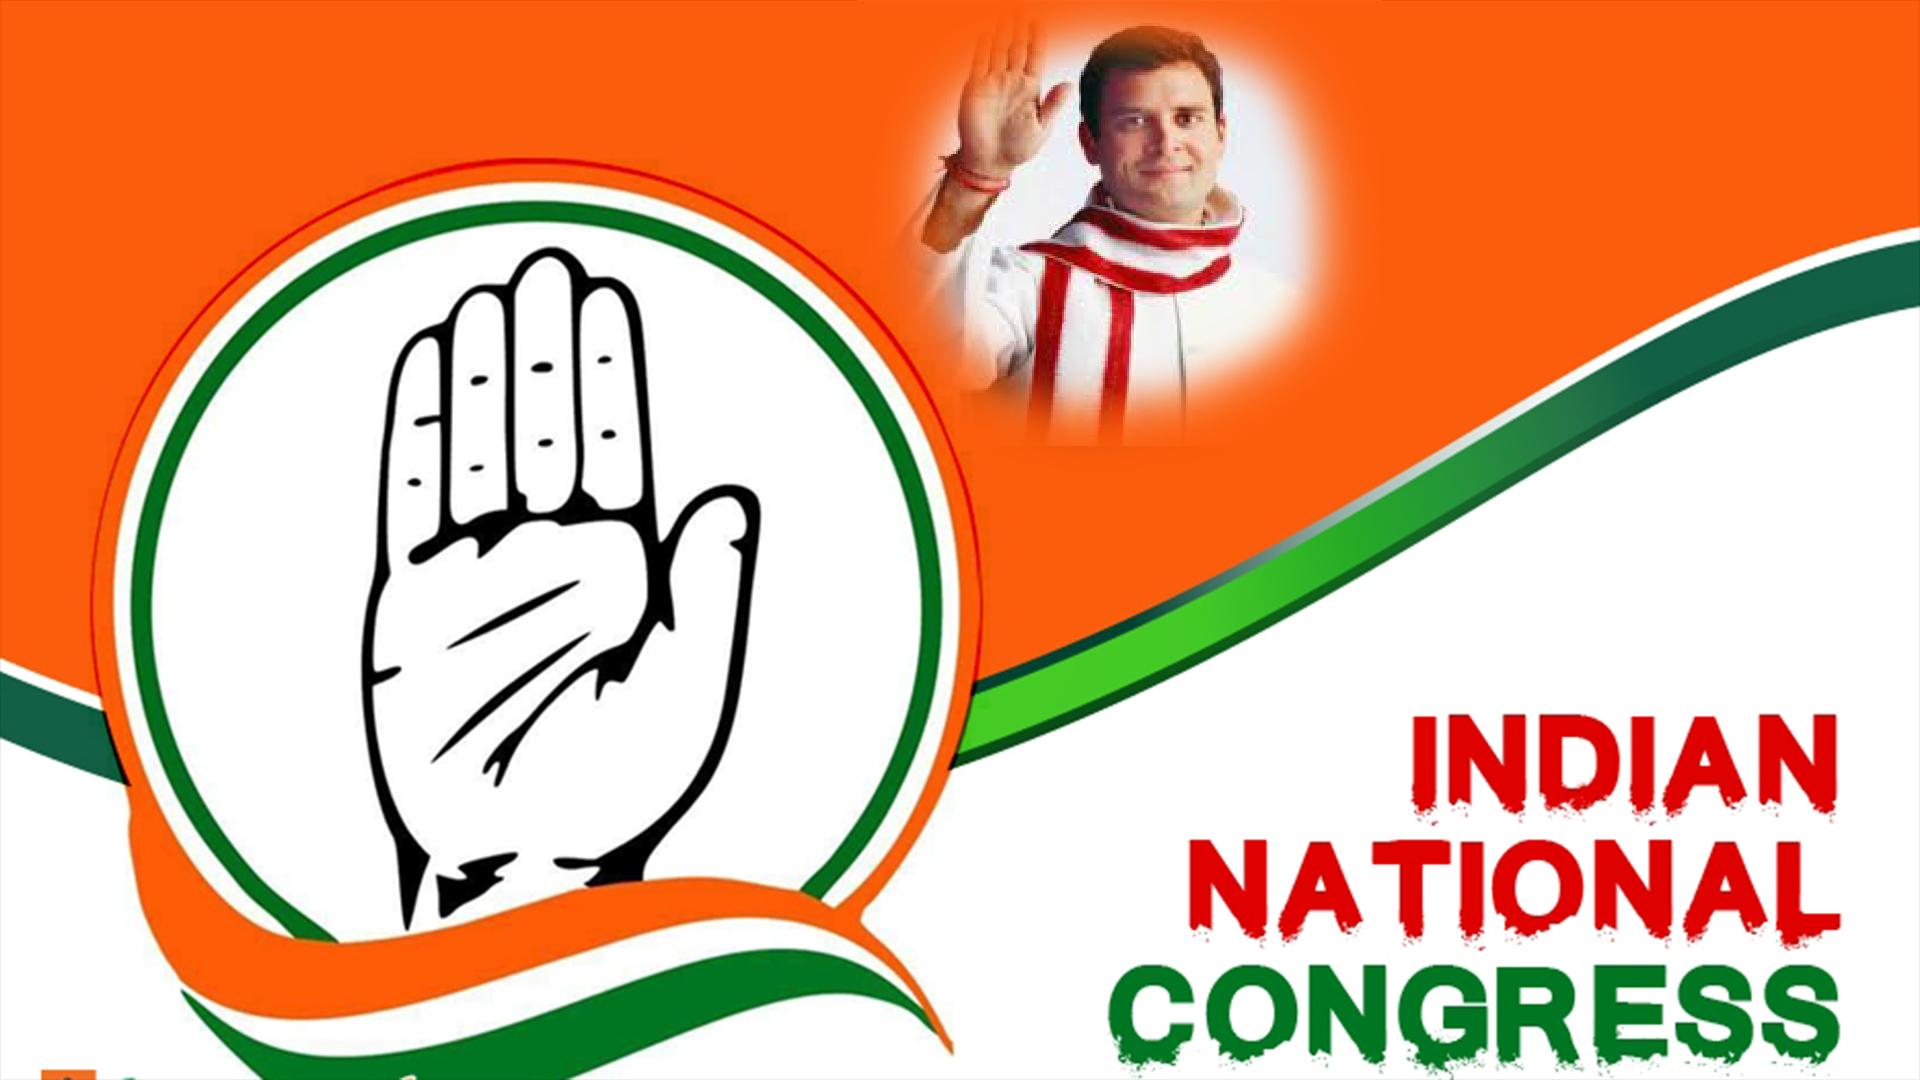 Congress Party (INC frames 2019) Photo Frames for Android